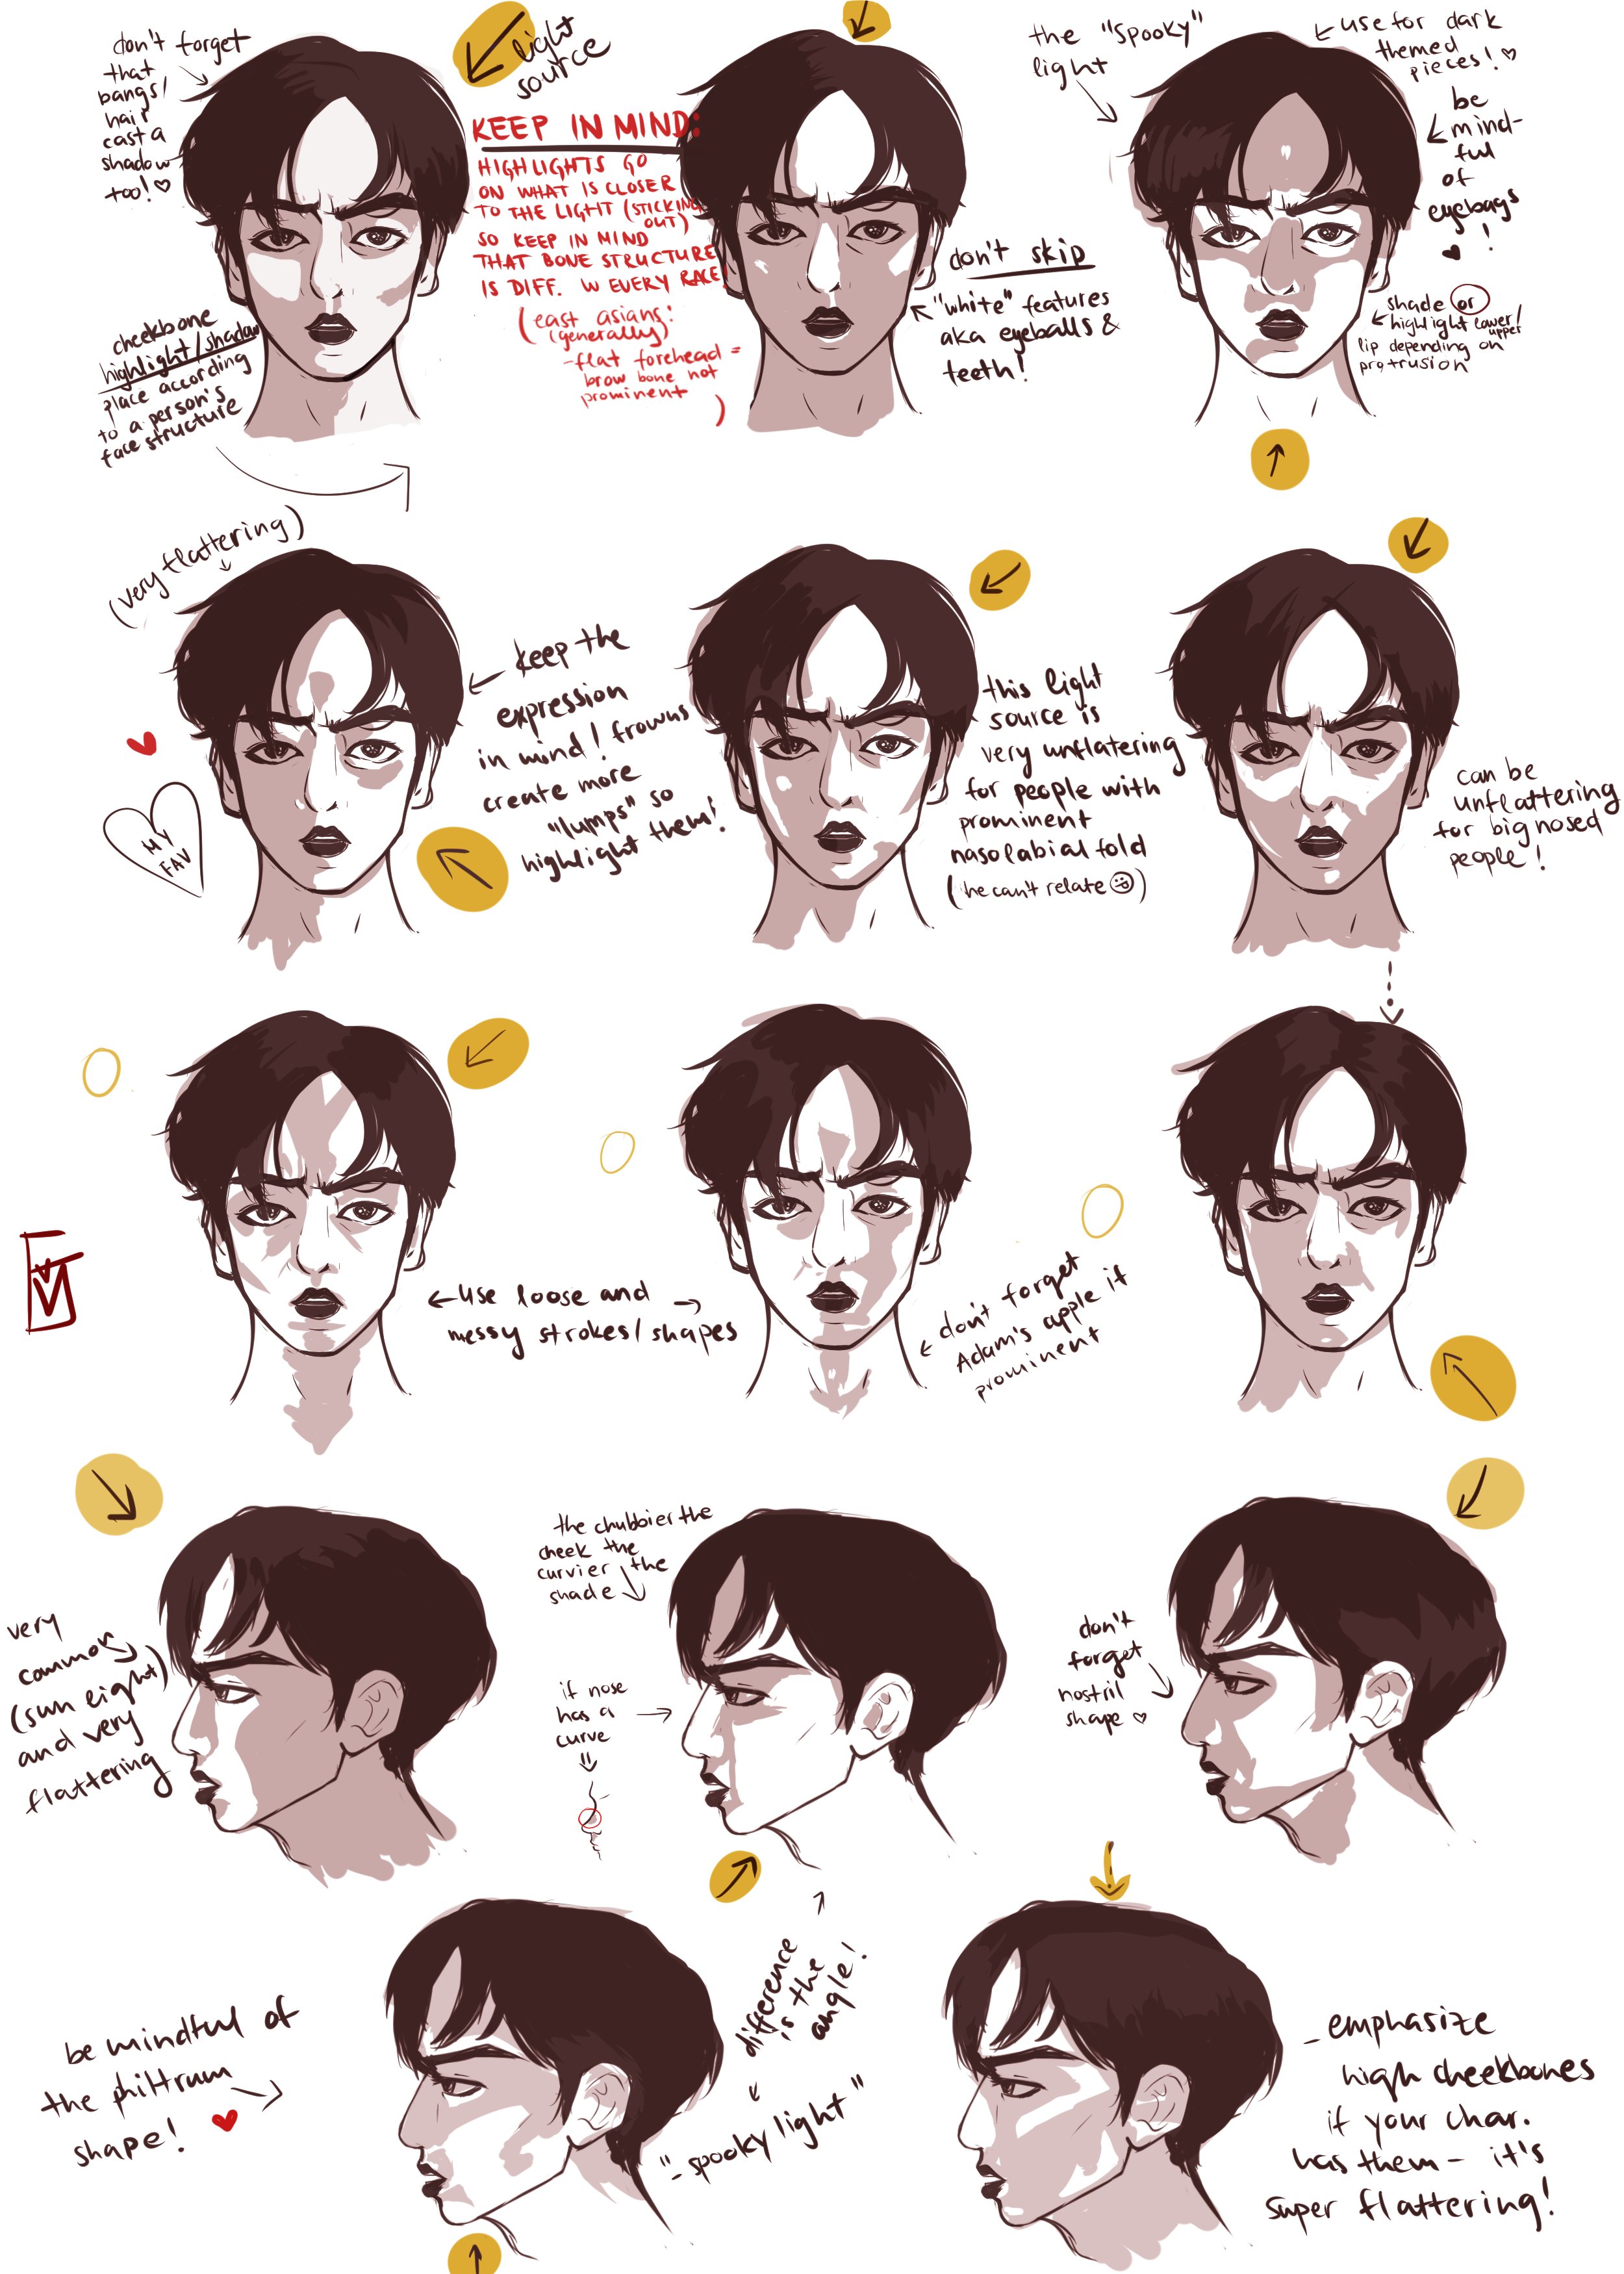 o on Twitter: "i fanartists shy away from playing light sources so here's a brief face study ft. jeongguk! hopefully a helpful reference https://t.co/jH3jyLg9tH" / Twitter